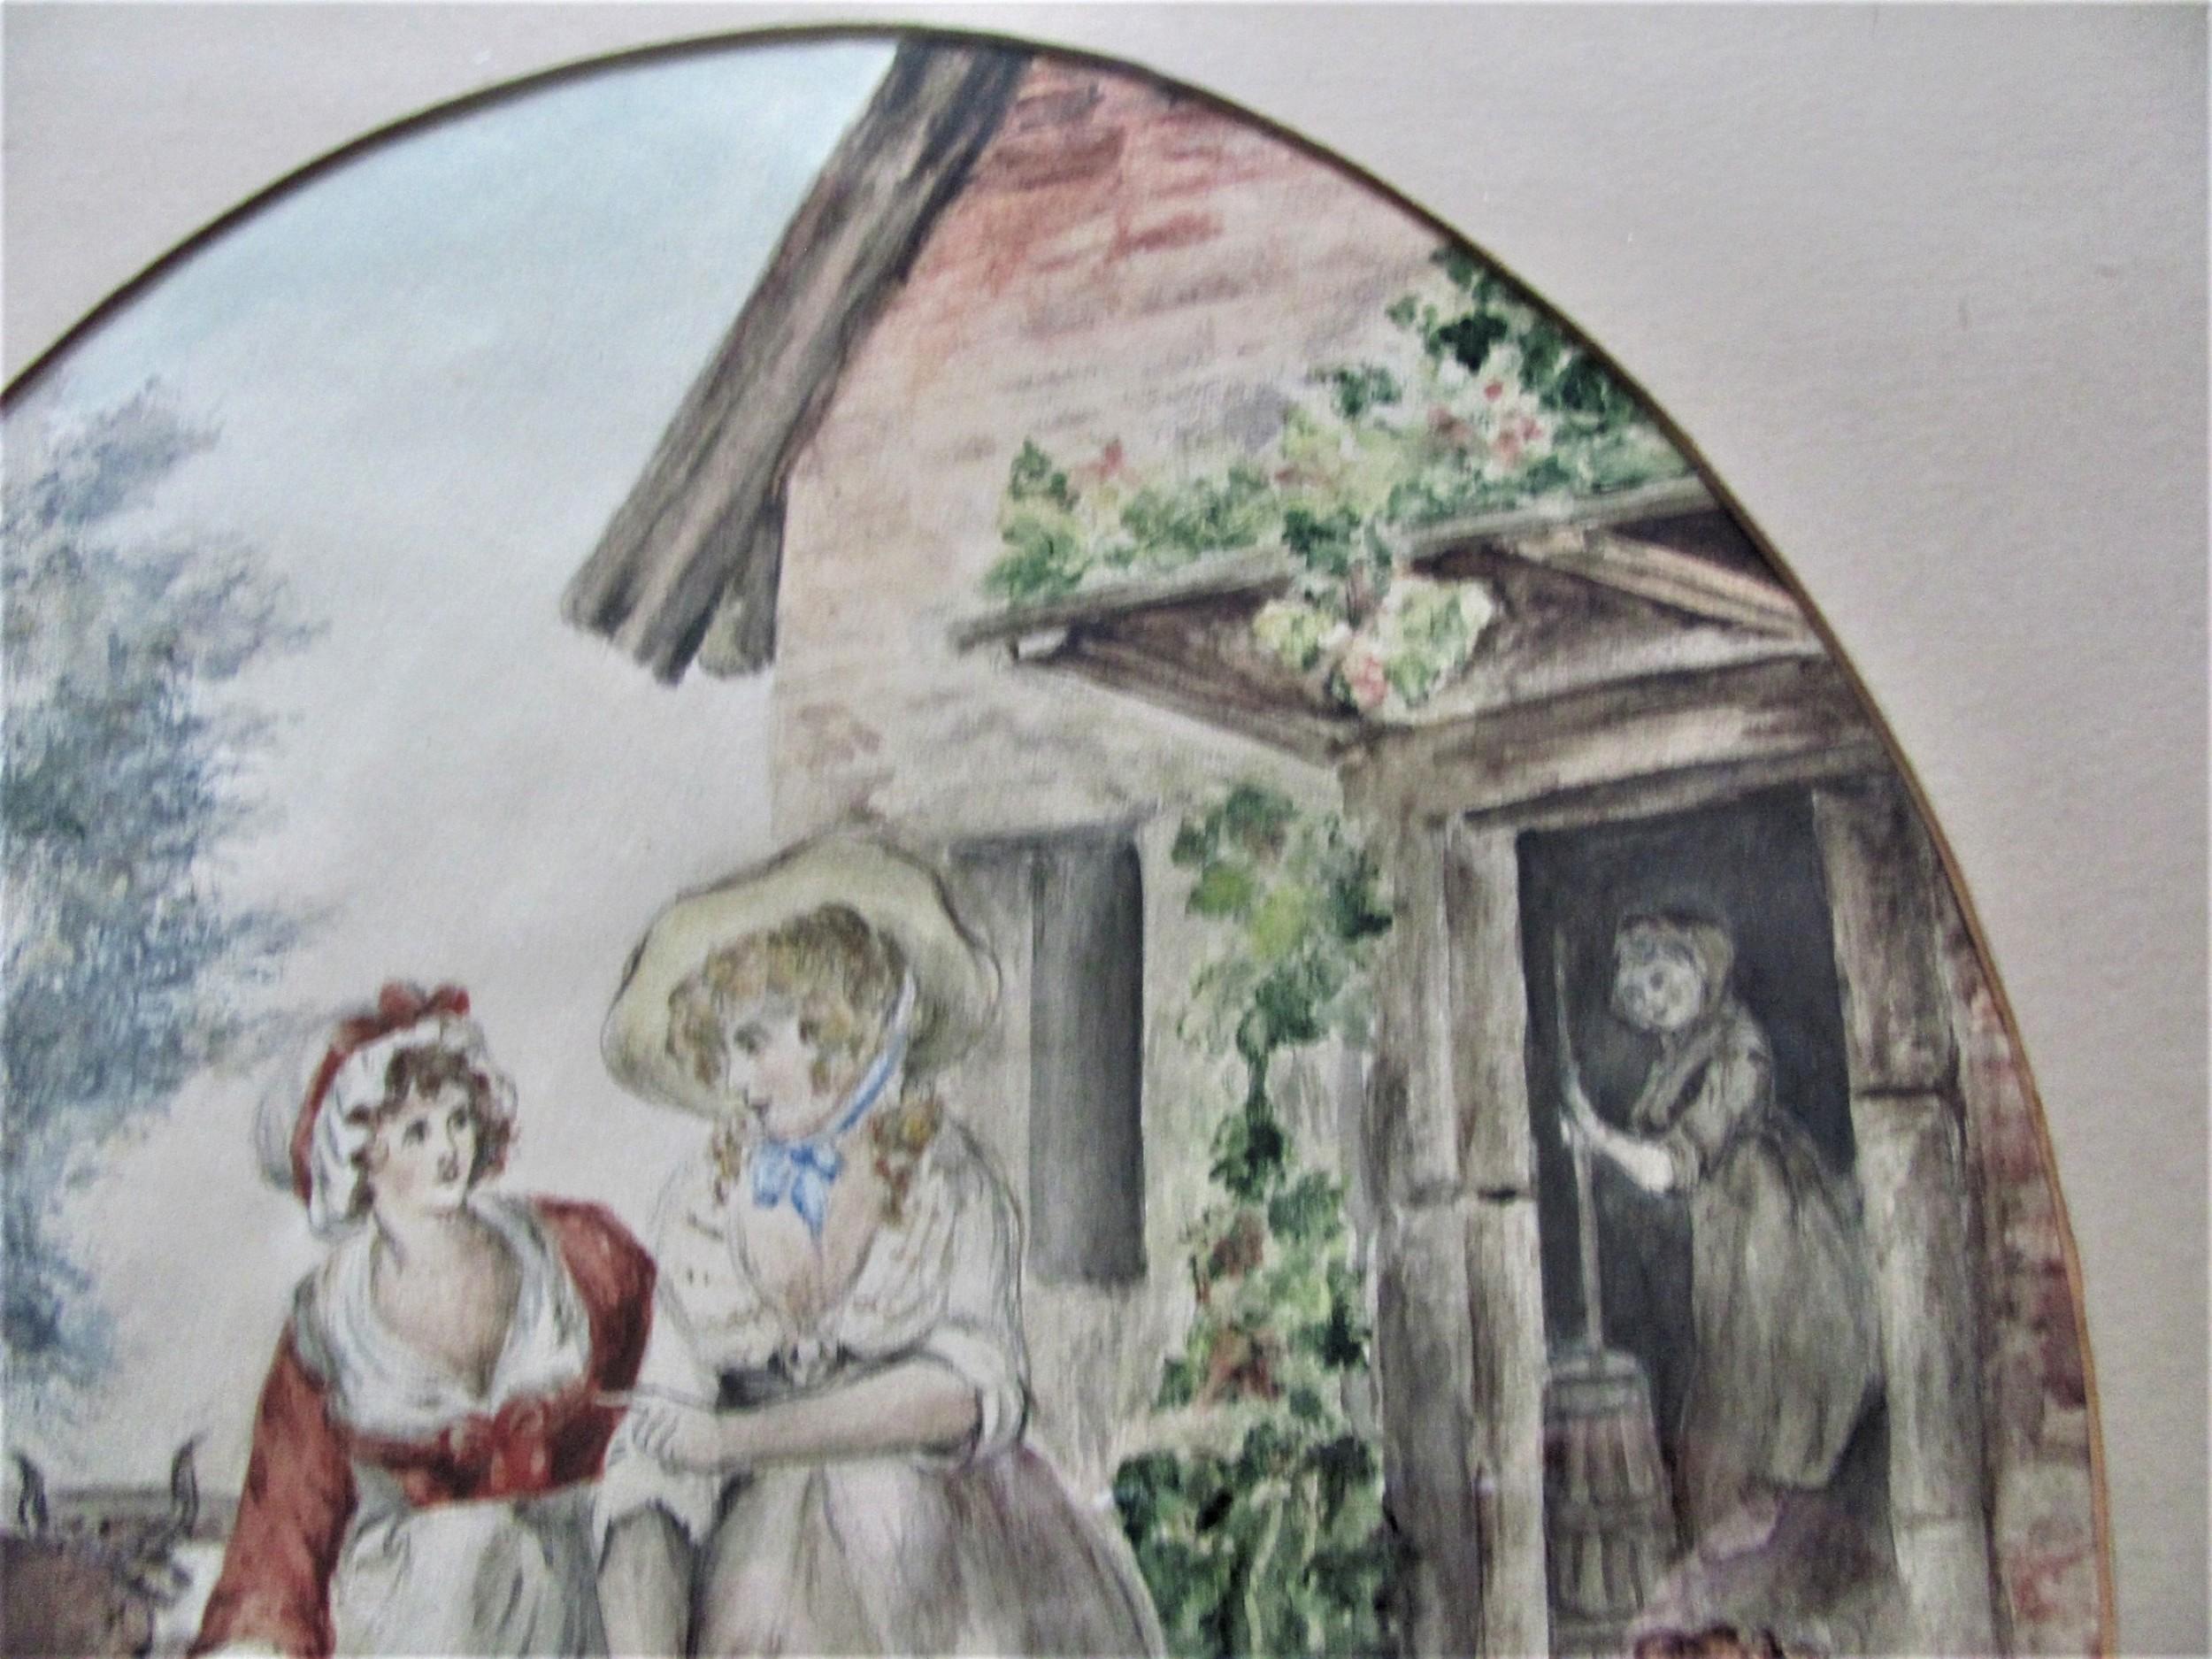 A 19th Century WATERCOLOUR depicting a charming British rural scene with Milk maids and children in a farmstead
size of image approx 28 x 23 cm (11